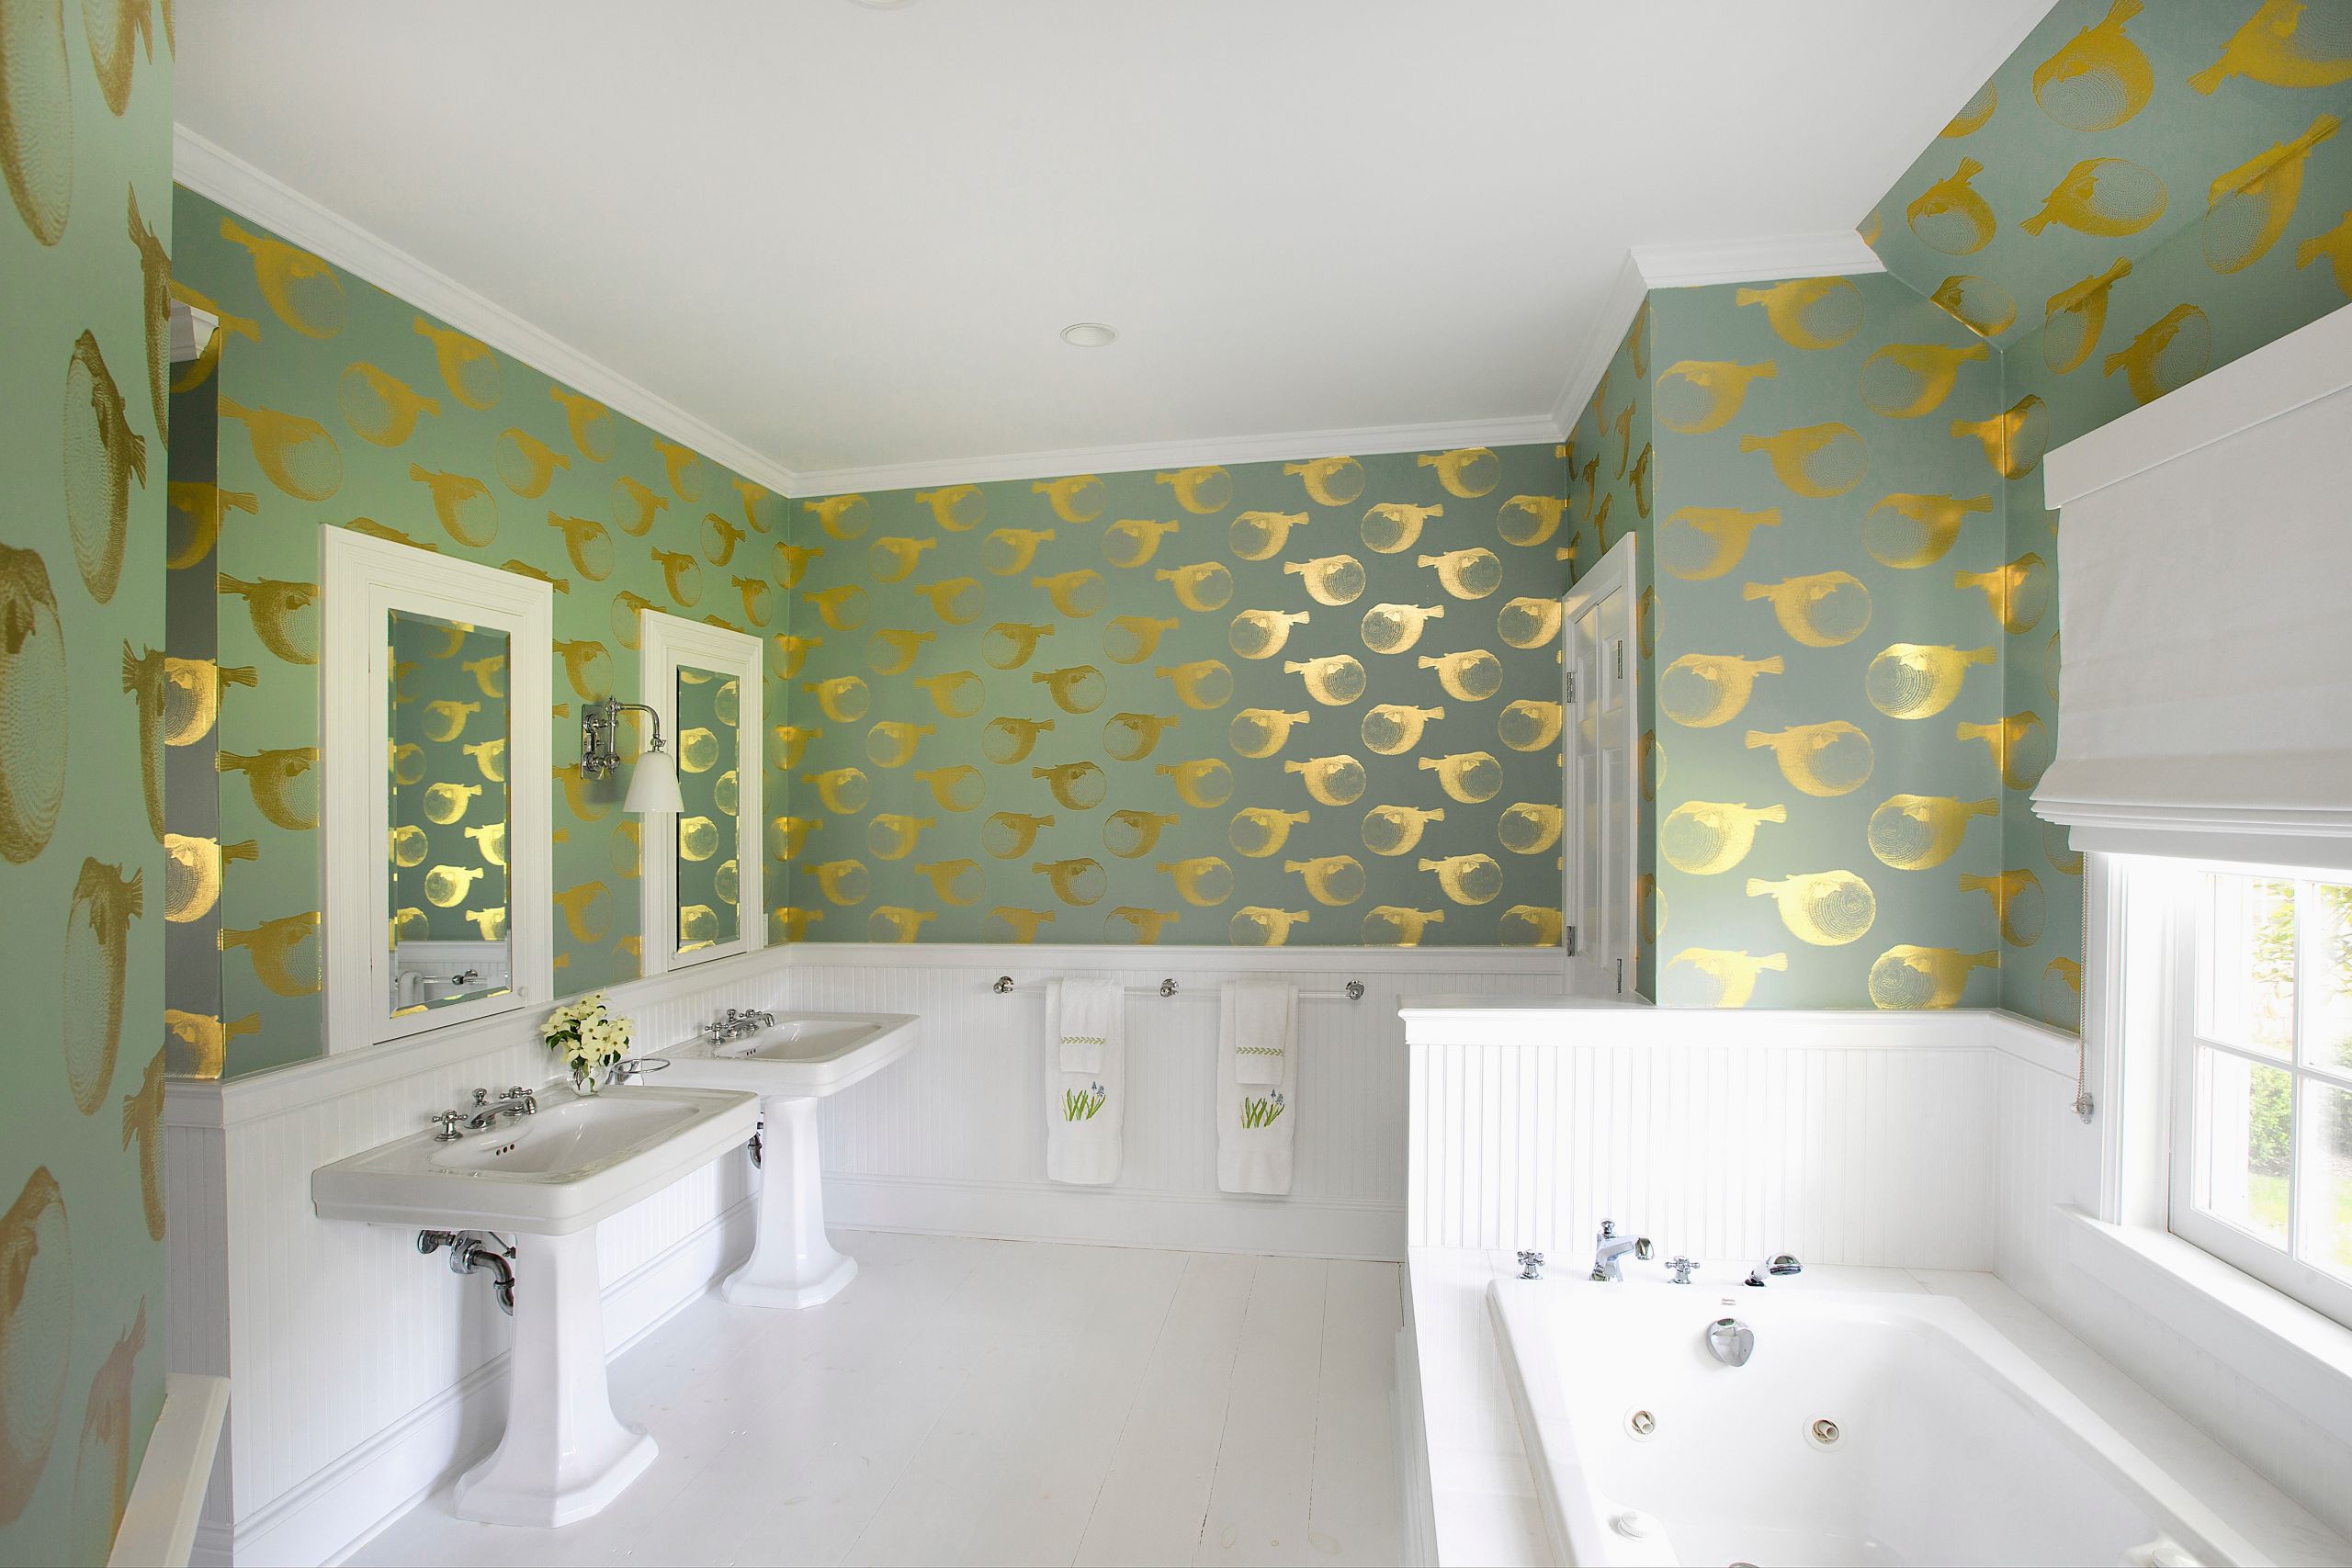 Modern Bathroom Wallpaper
 Before and After Easy Bathroom Makeover Design Idea with